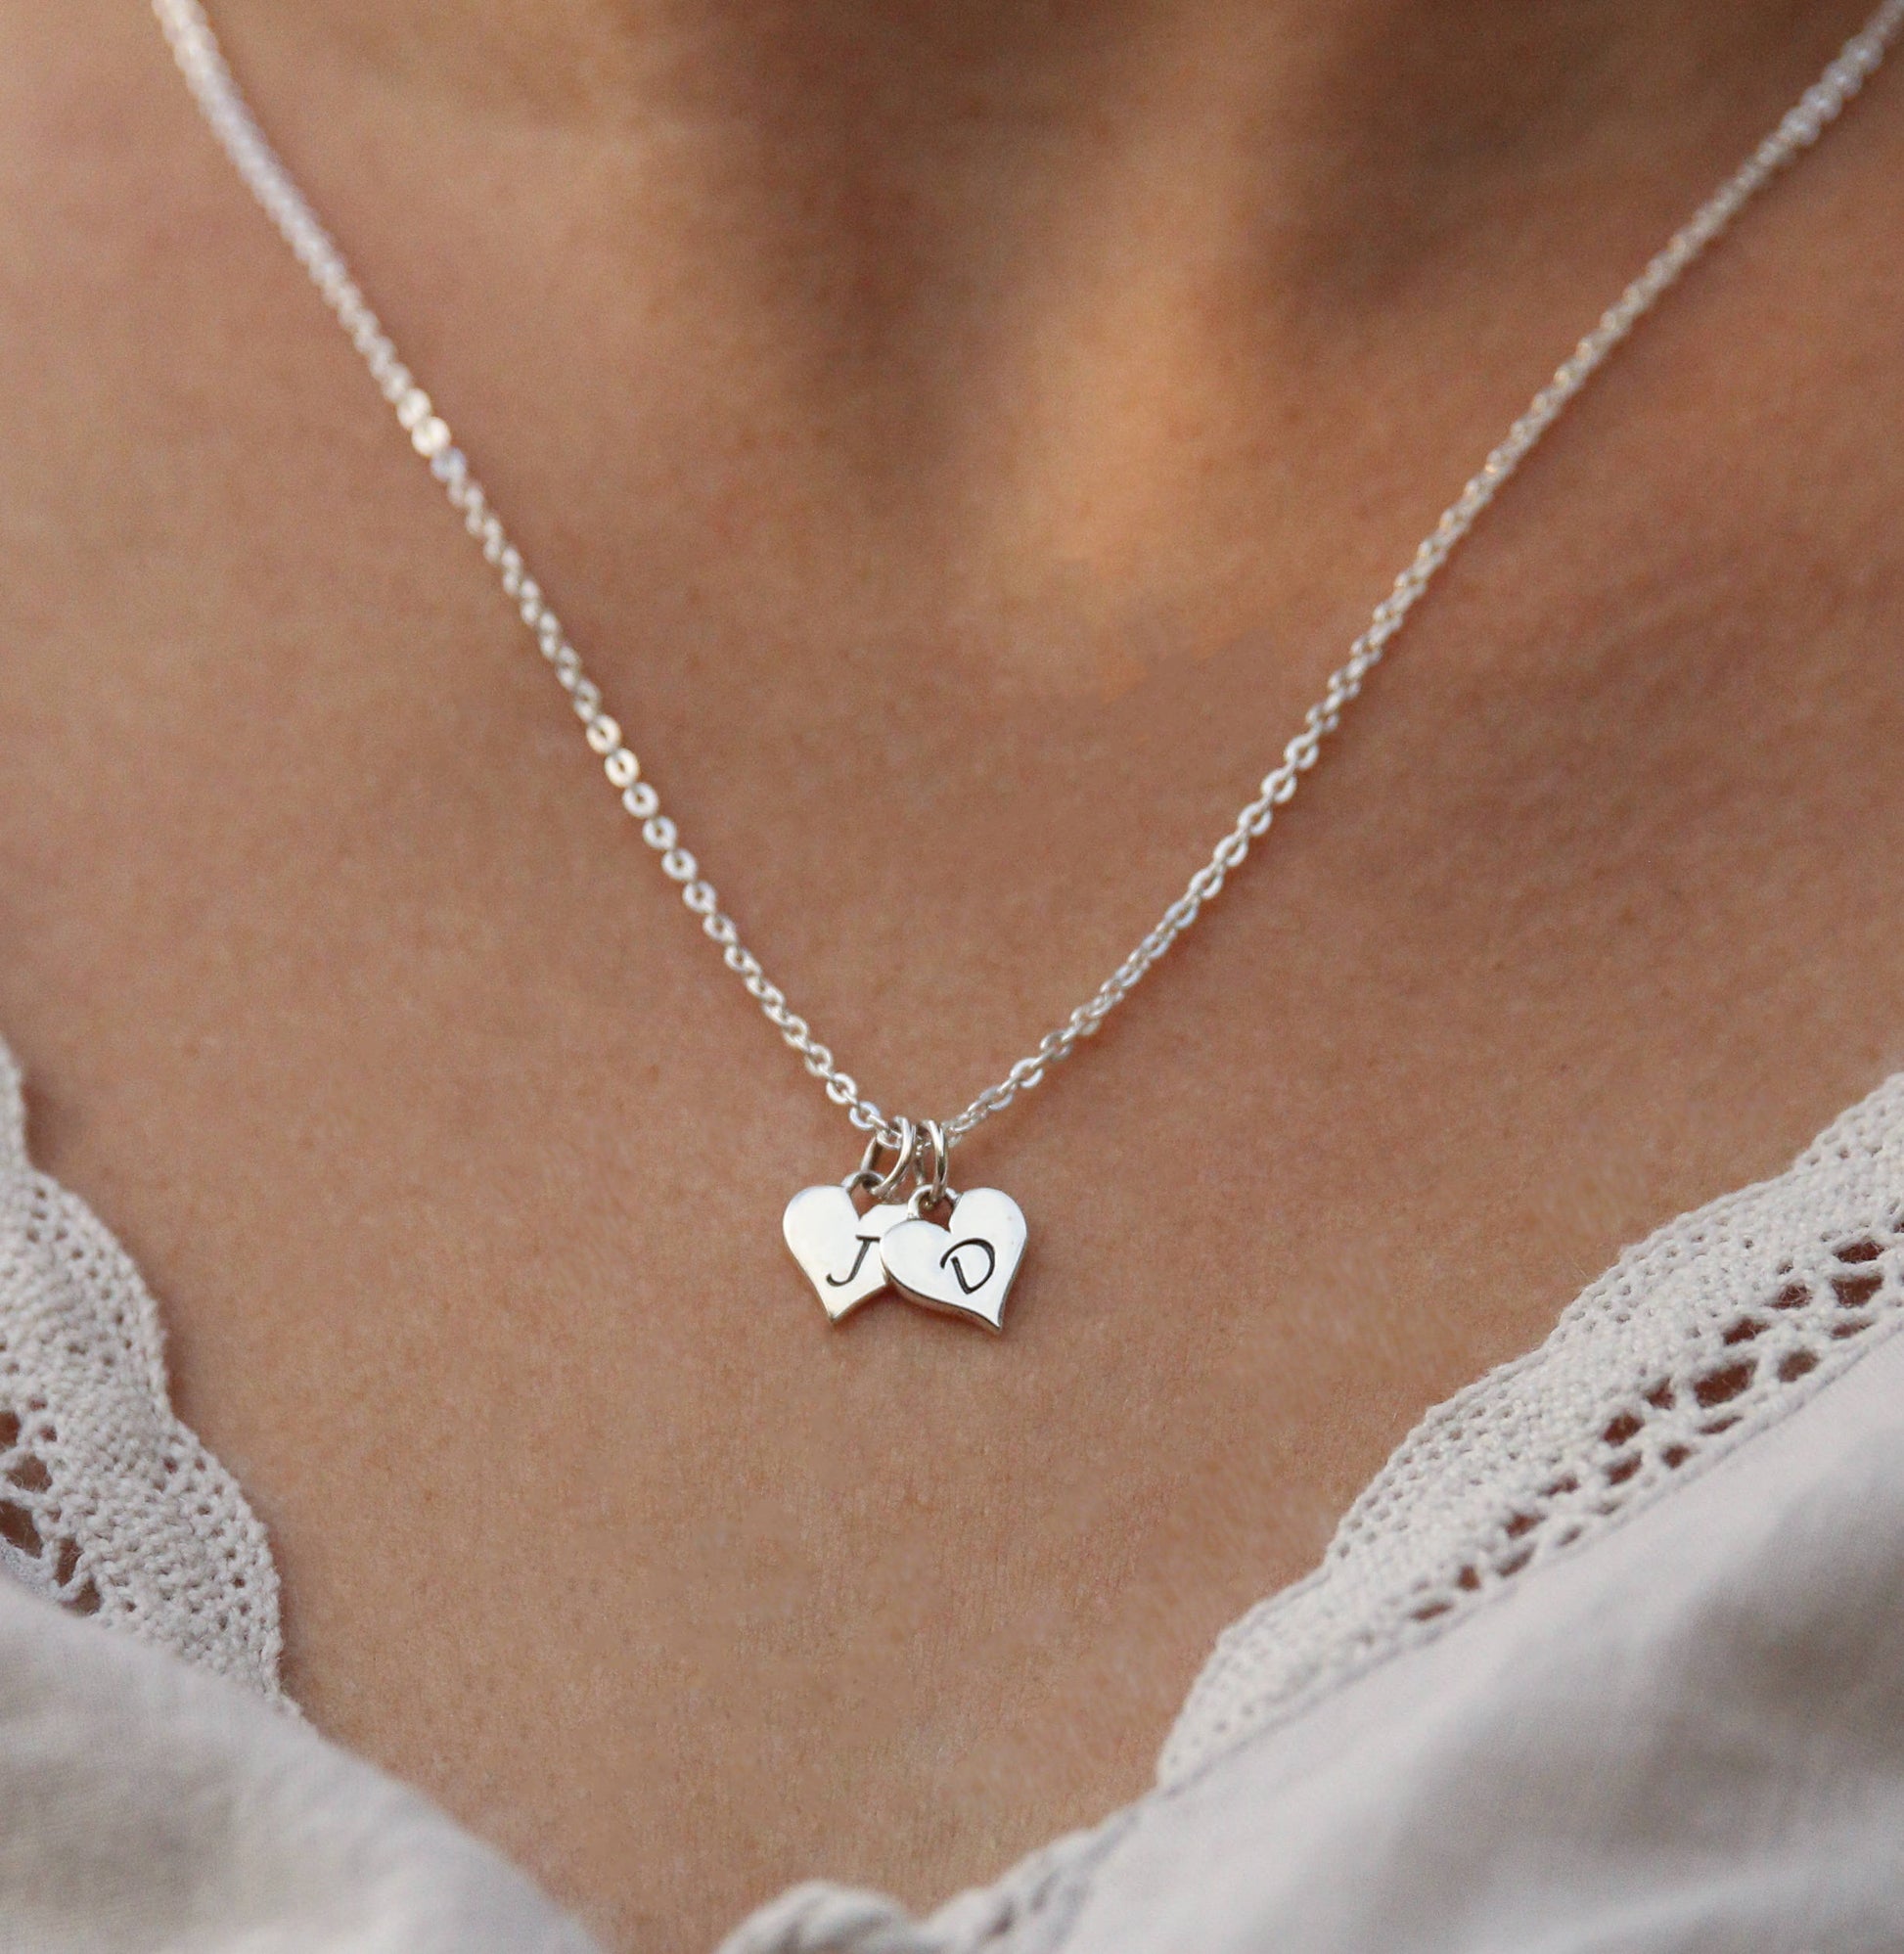 personalized initial necklace gift from boyfriend